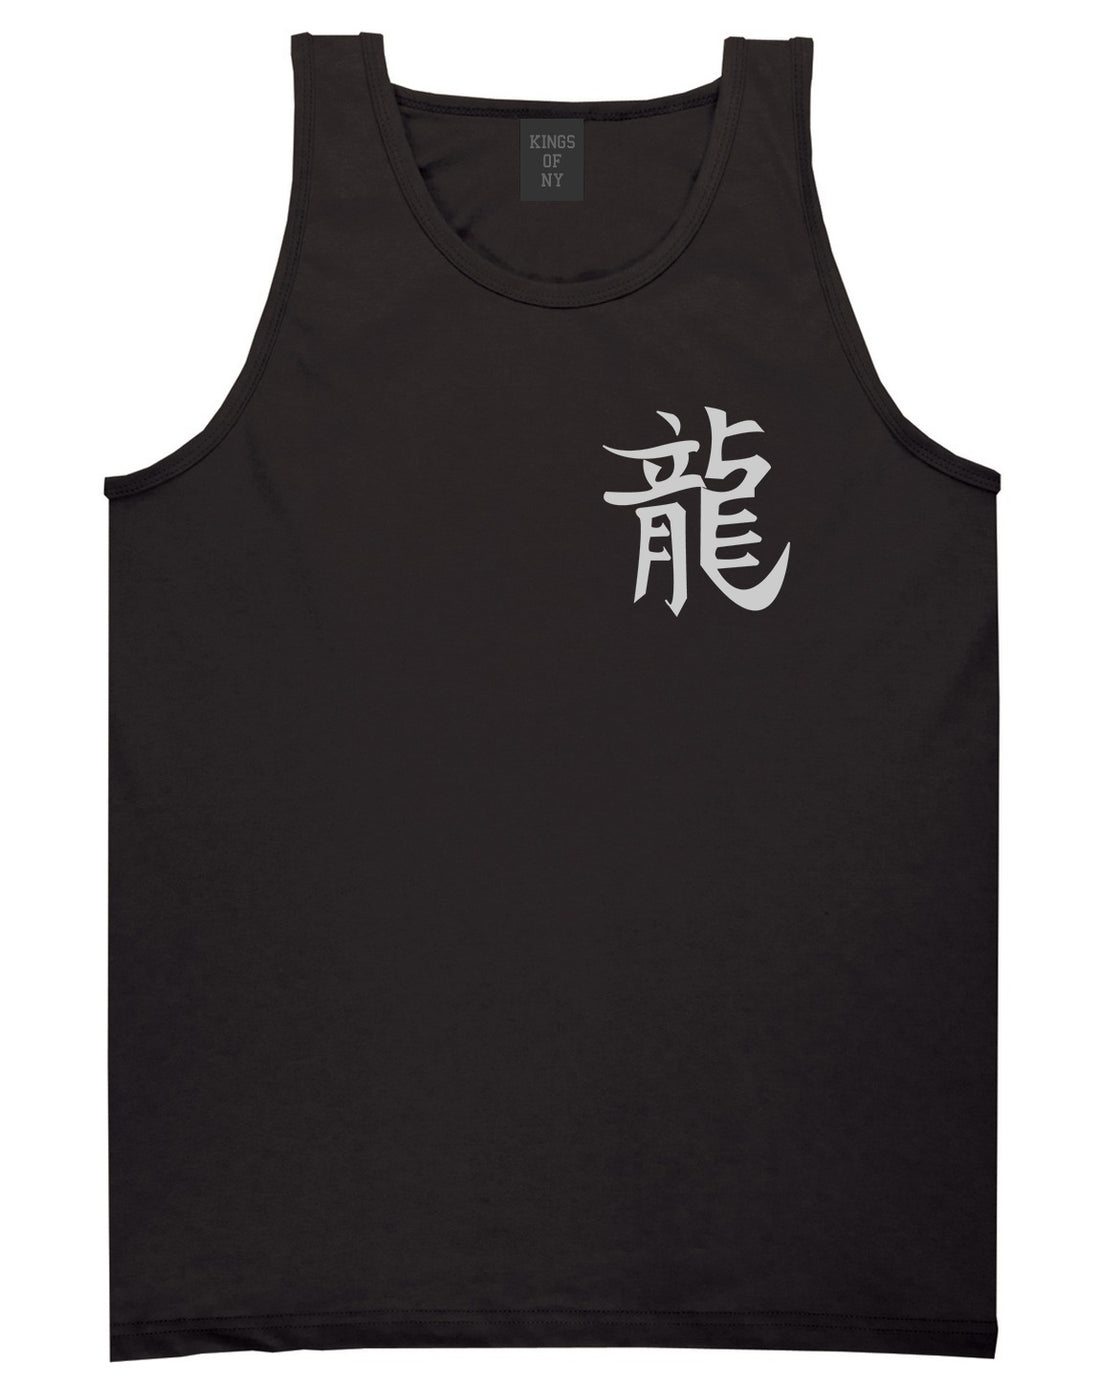 Chinese Symbol For Dragon Chest Black Tank Top Shirt by Kings Of NY